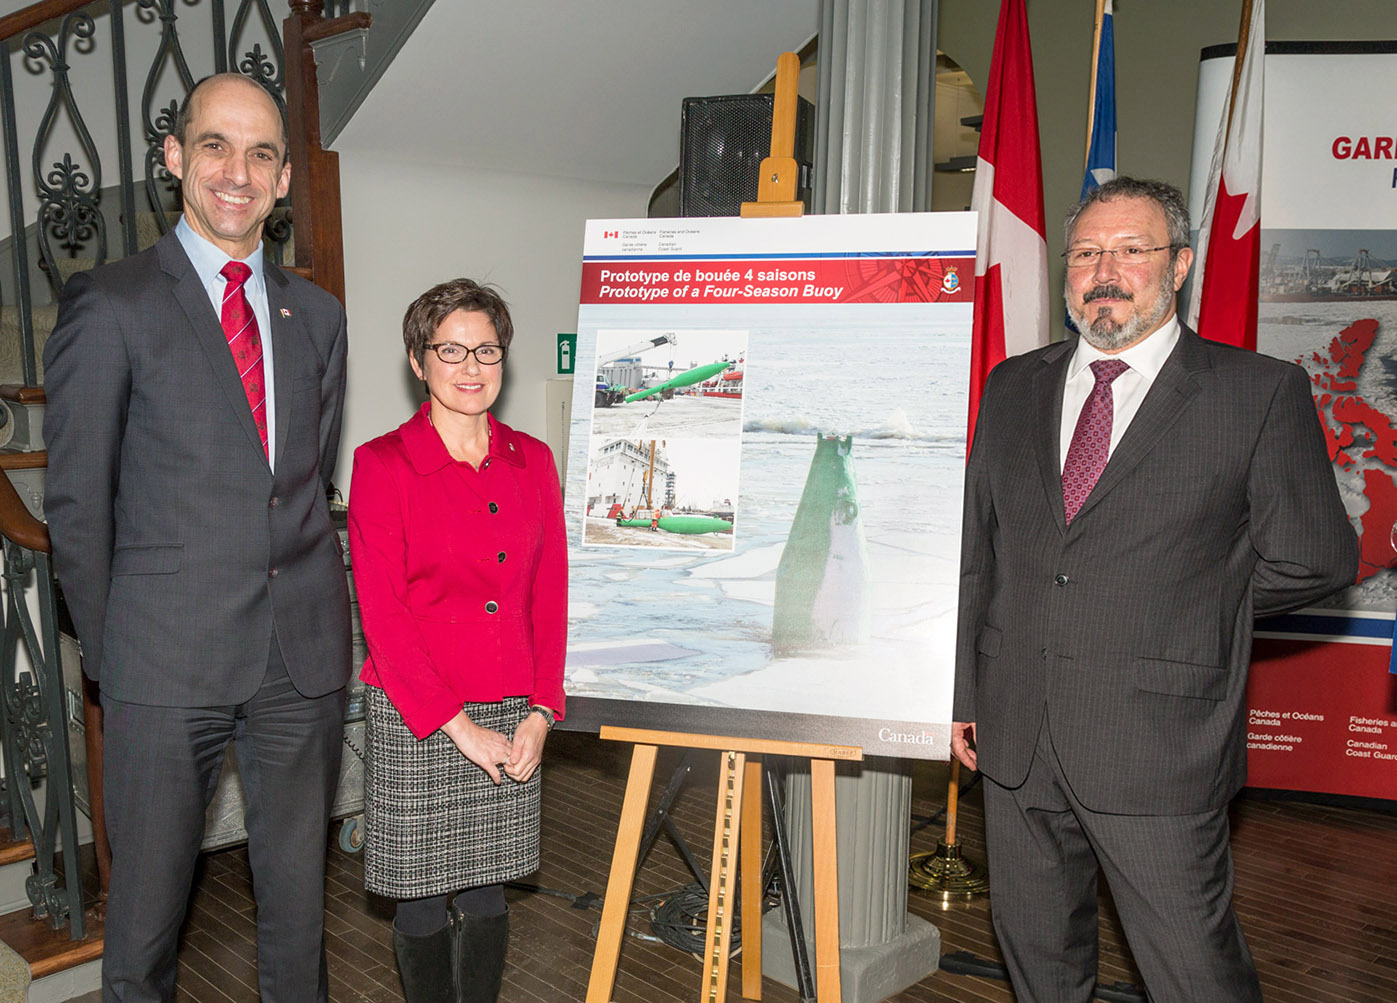 The Honourable Steven Blaney, Minister of Public Safety and Emergency Preparedness Canada, Sylvie Pelletier, Director of Programs at the Canadian Coast Guard, and Jean-François Belzile, Director of Marine Operations, Shipping Federation of Canada, pose in front of images of a prototype of new generation four season buoys that will be deployed by the Canadian Coast Guard between Québec and Montréal over the next few years.